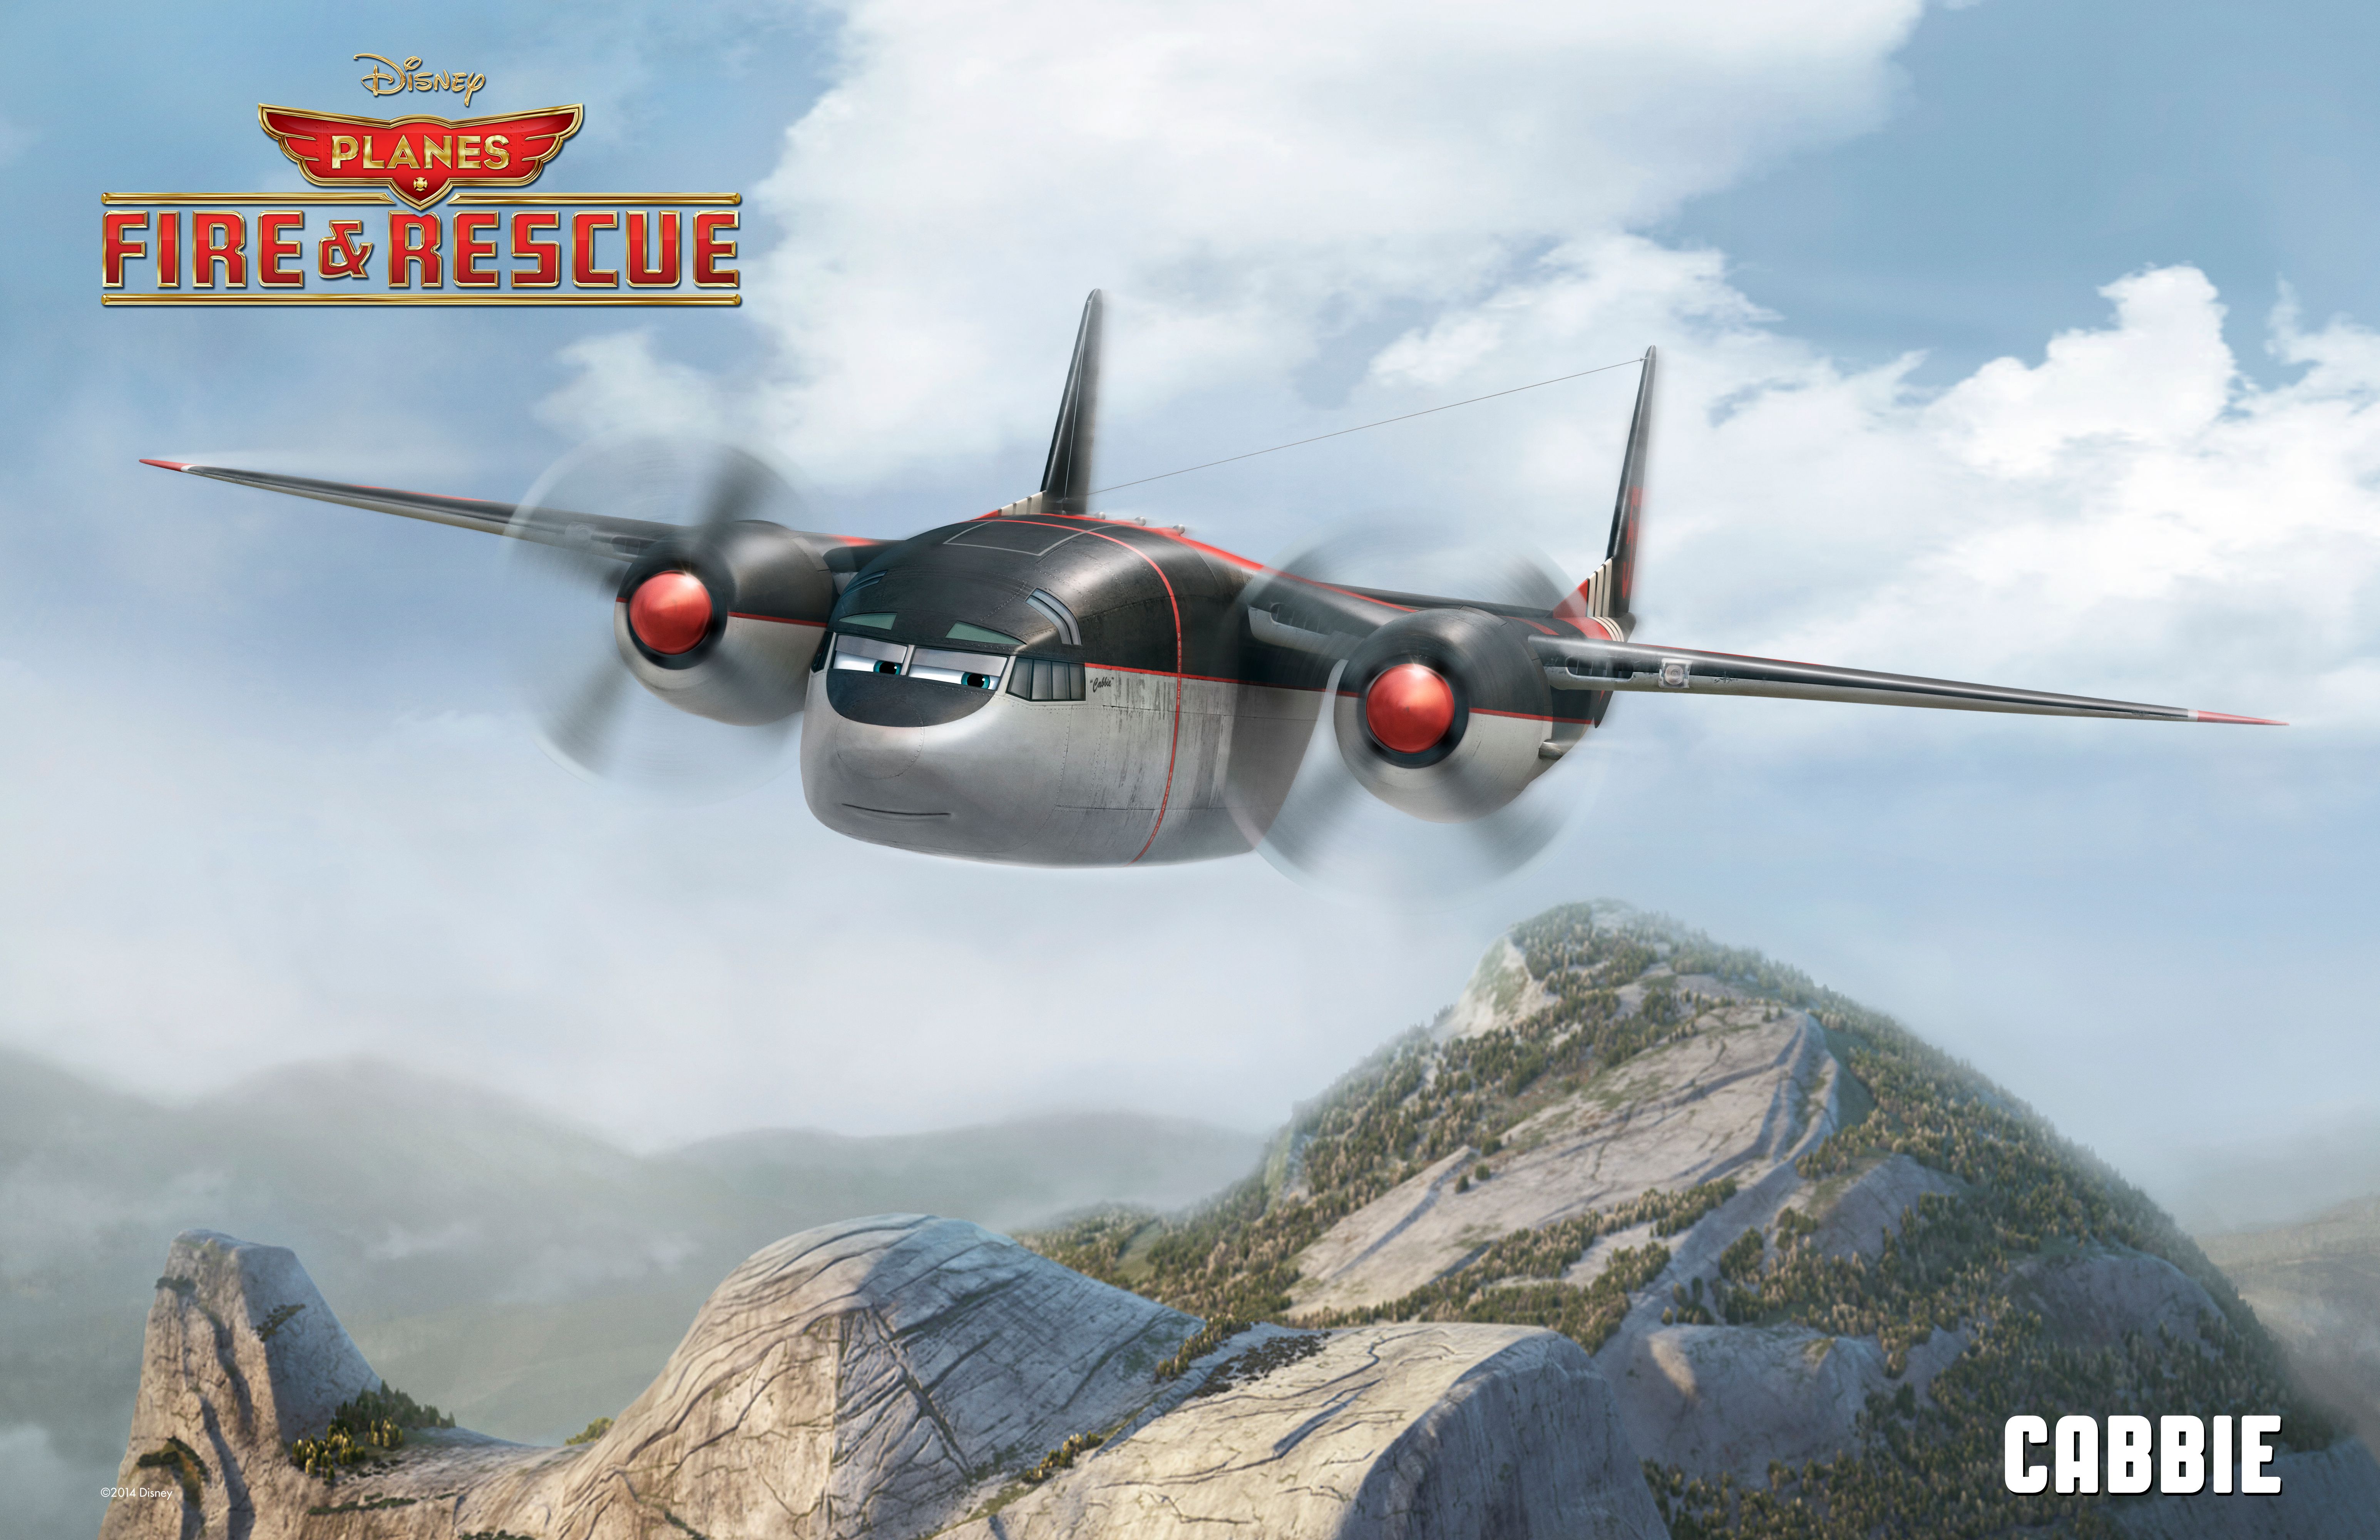 Planes Fire and Rescue Cabbie Photo